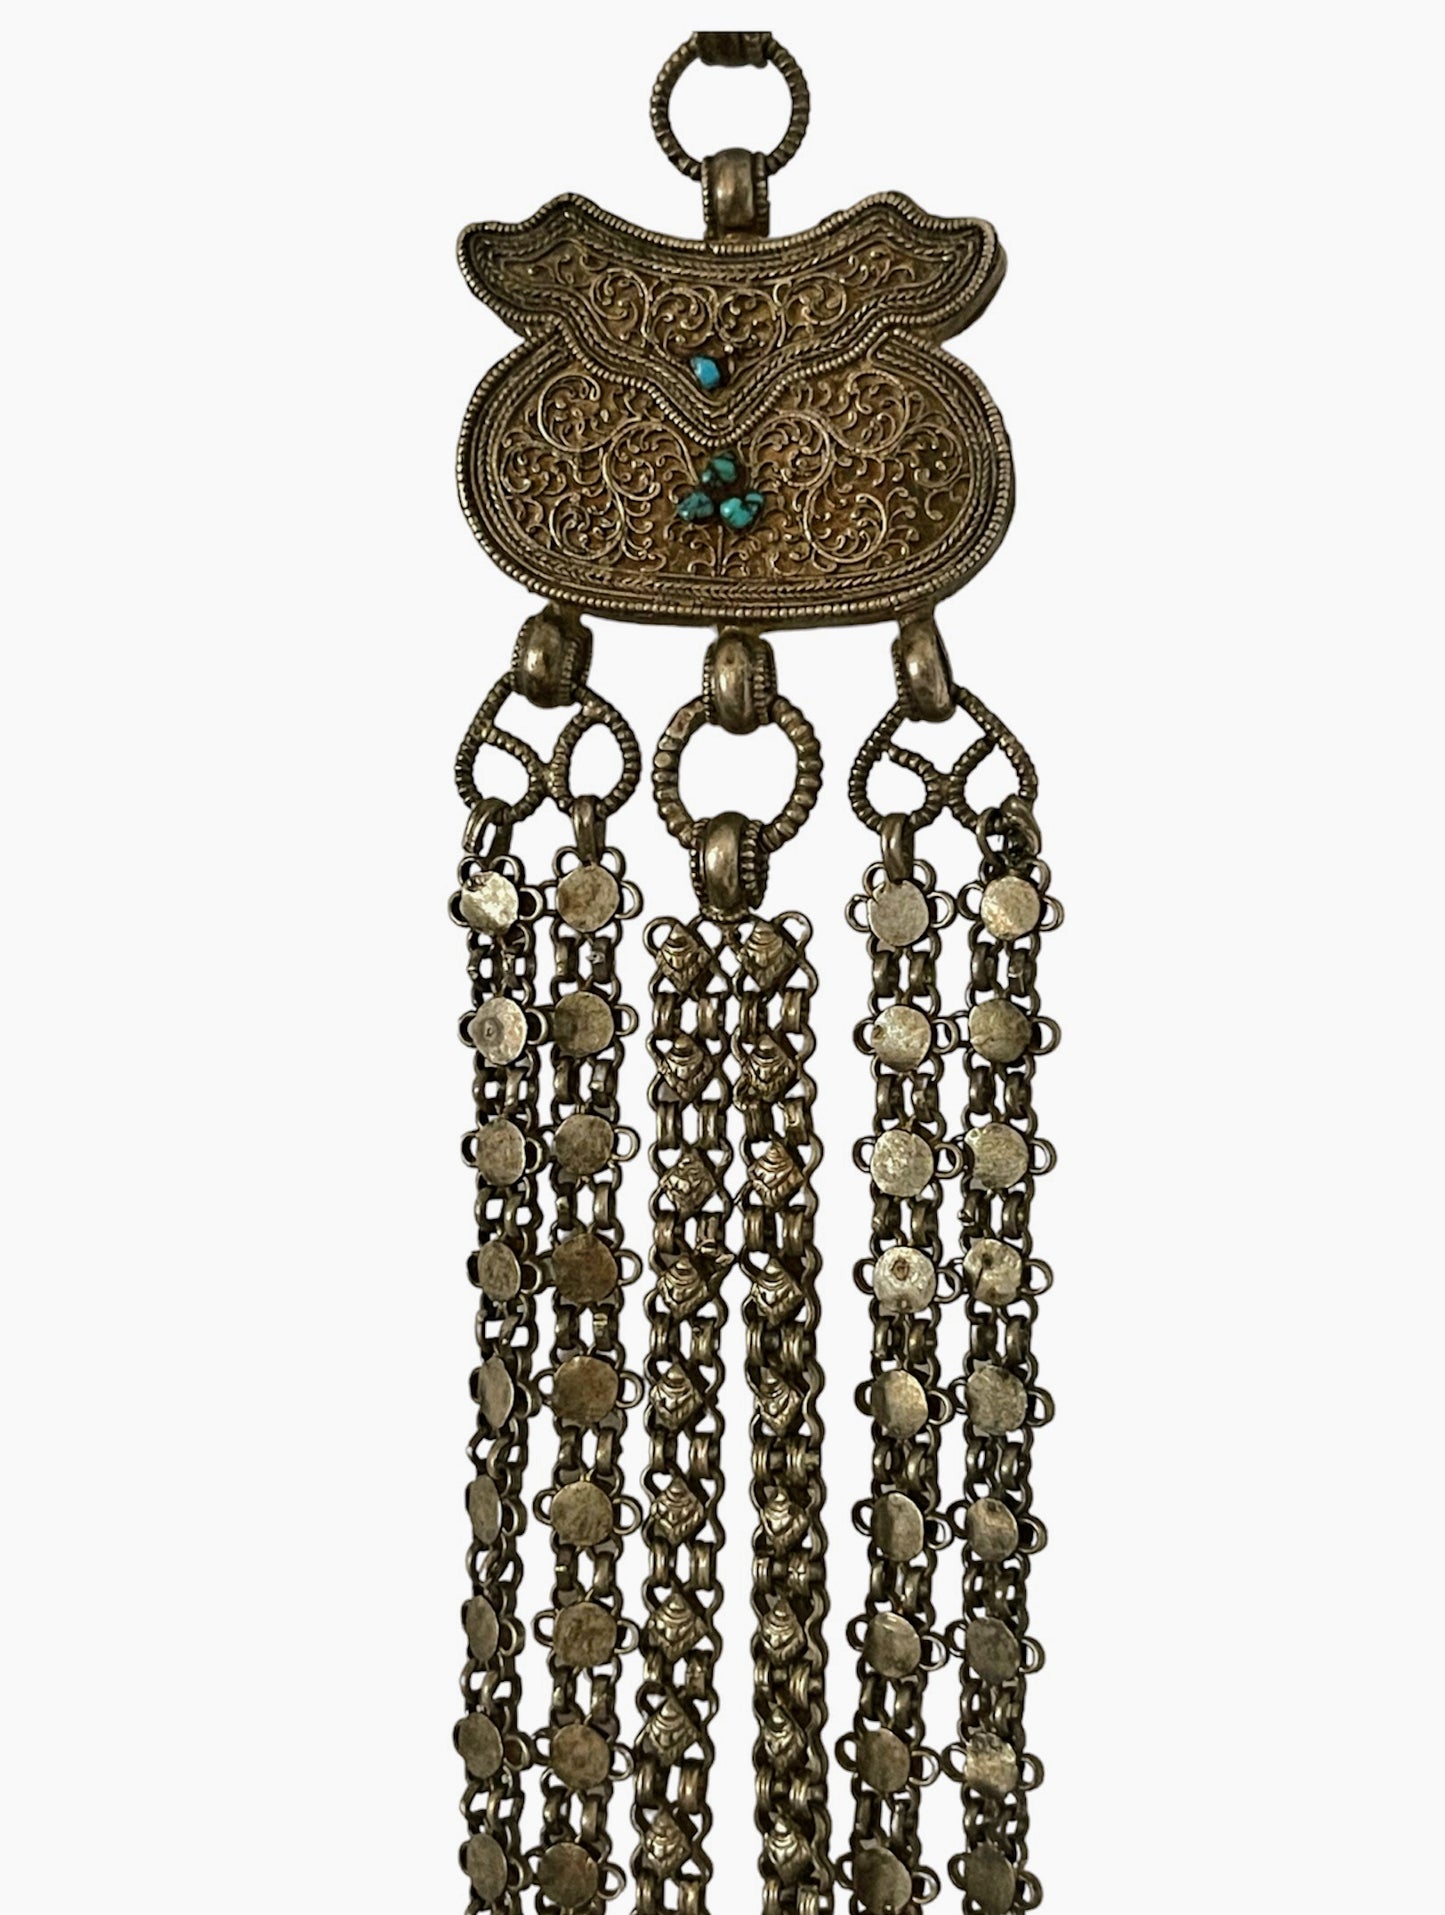 Late 19th C. Silver chatelaine with chains